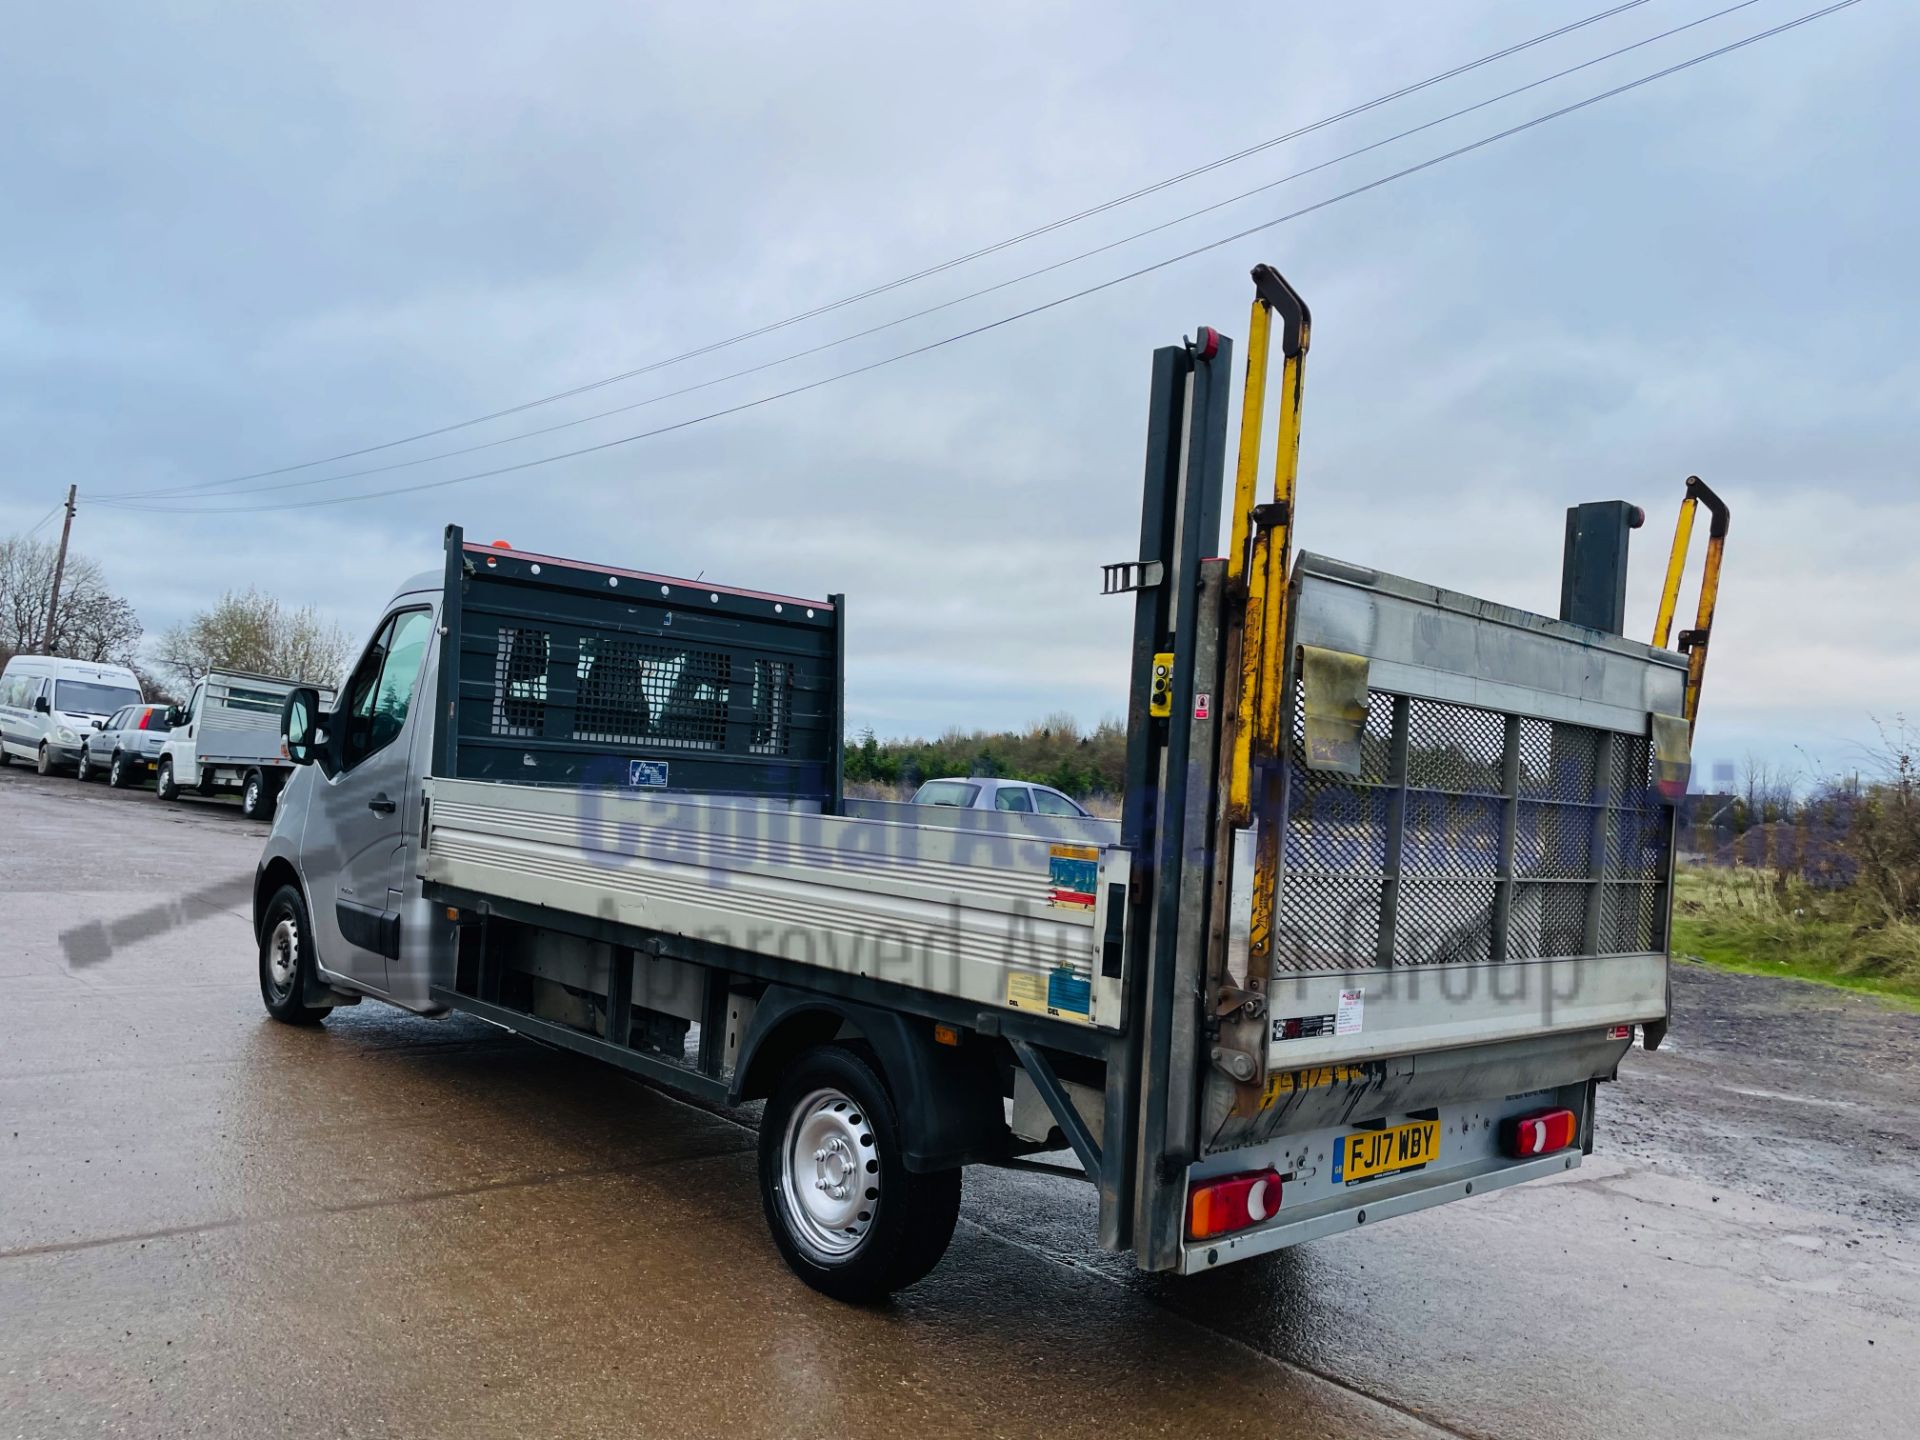 (On Sale) VAUXHALL MOVANO F3500 *LWB - DROPSIDE TRUCK* (2017 - EURO 6) ' 6 SPEED' *A/C* (TAIL-LIFT) - Image 6 of 40